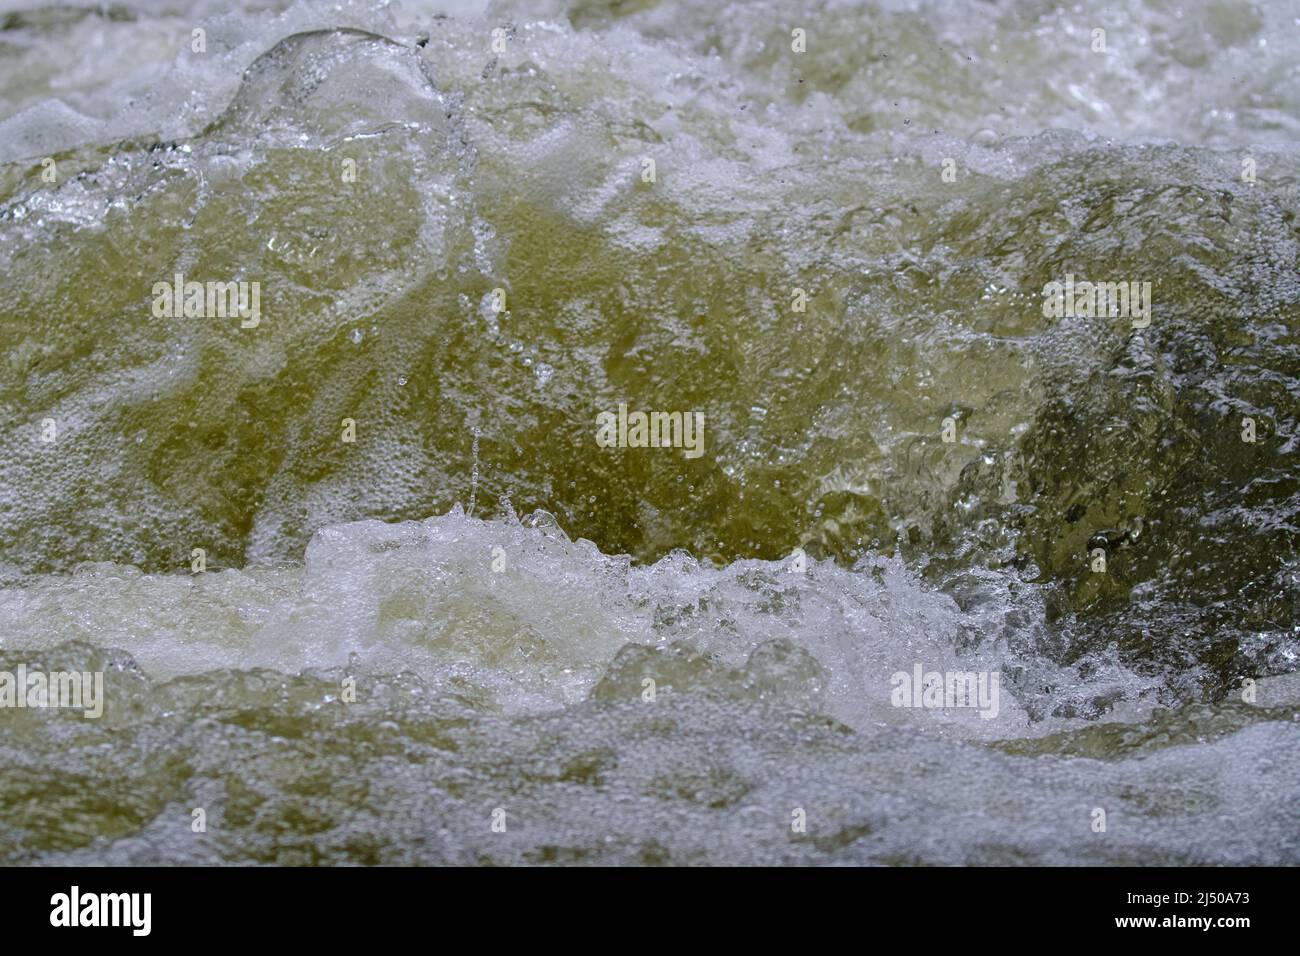 Texture of water in a natural state, in a river when splashing against the stones. Stock Photo